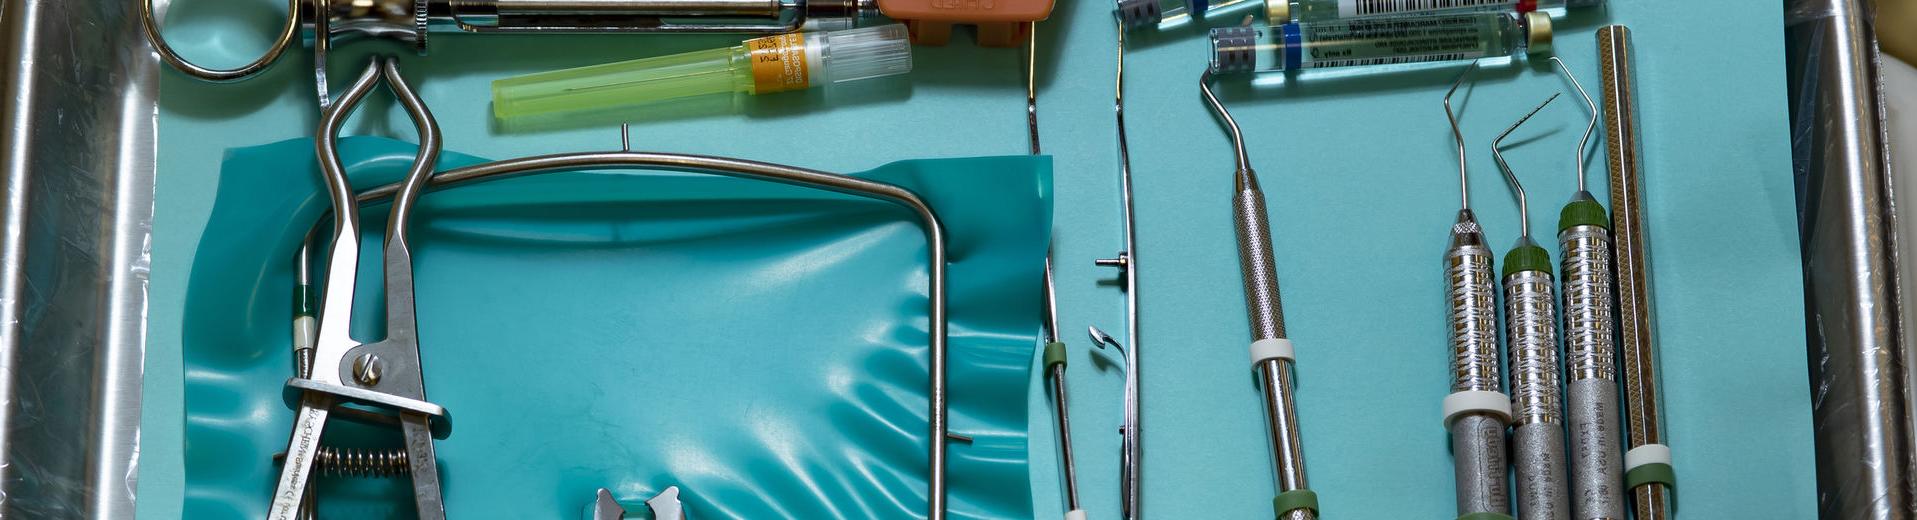 Dentistry tools arranged on a tray